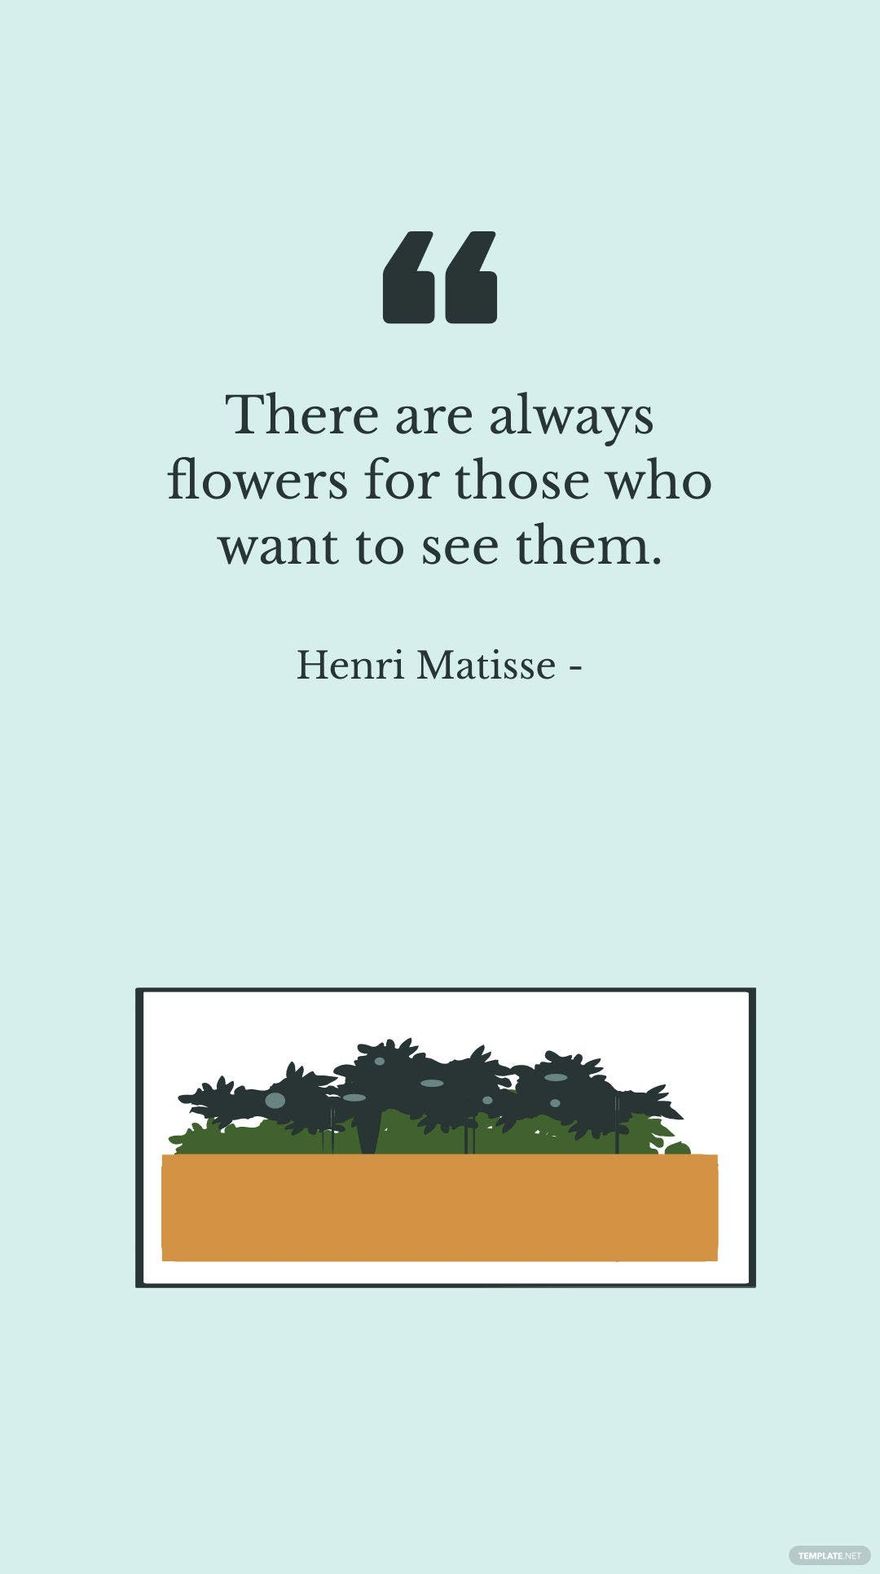 Free Henri Matisse - There are always flowers for those who want to see them. in JPG